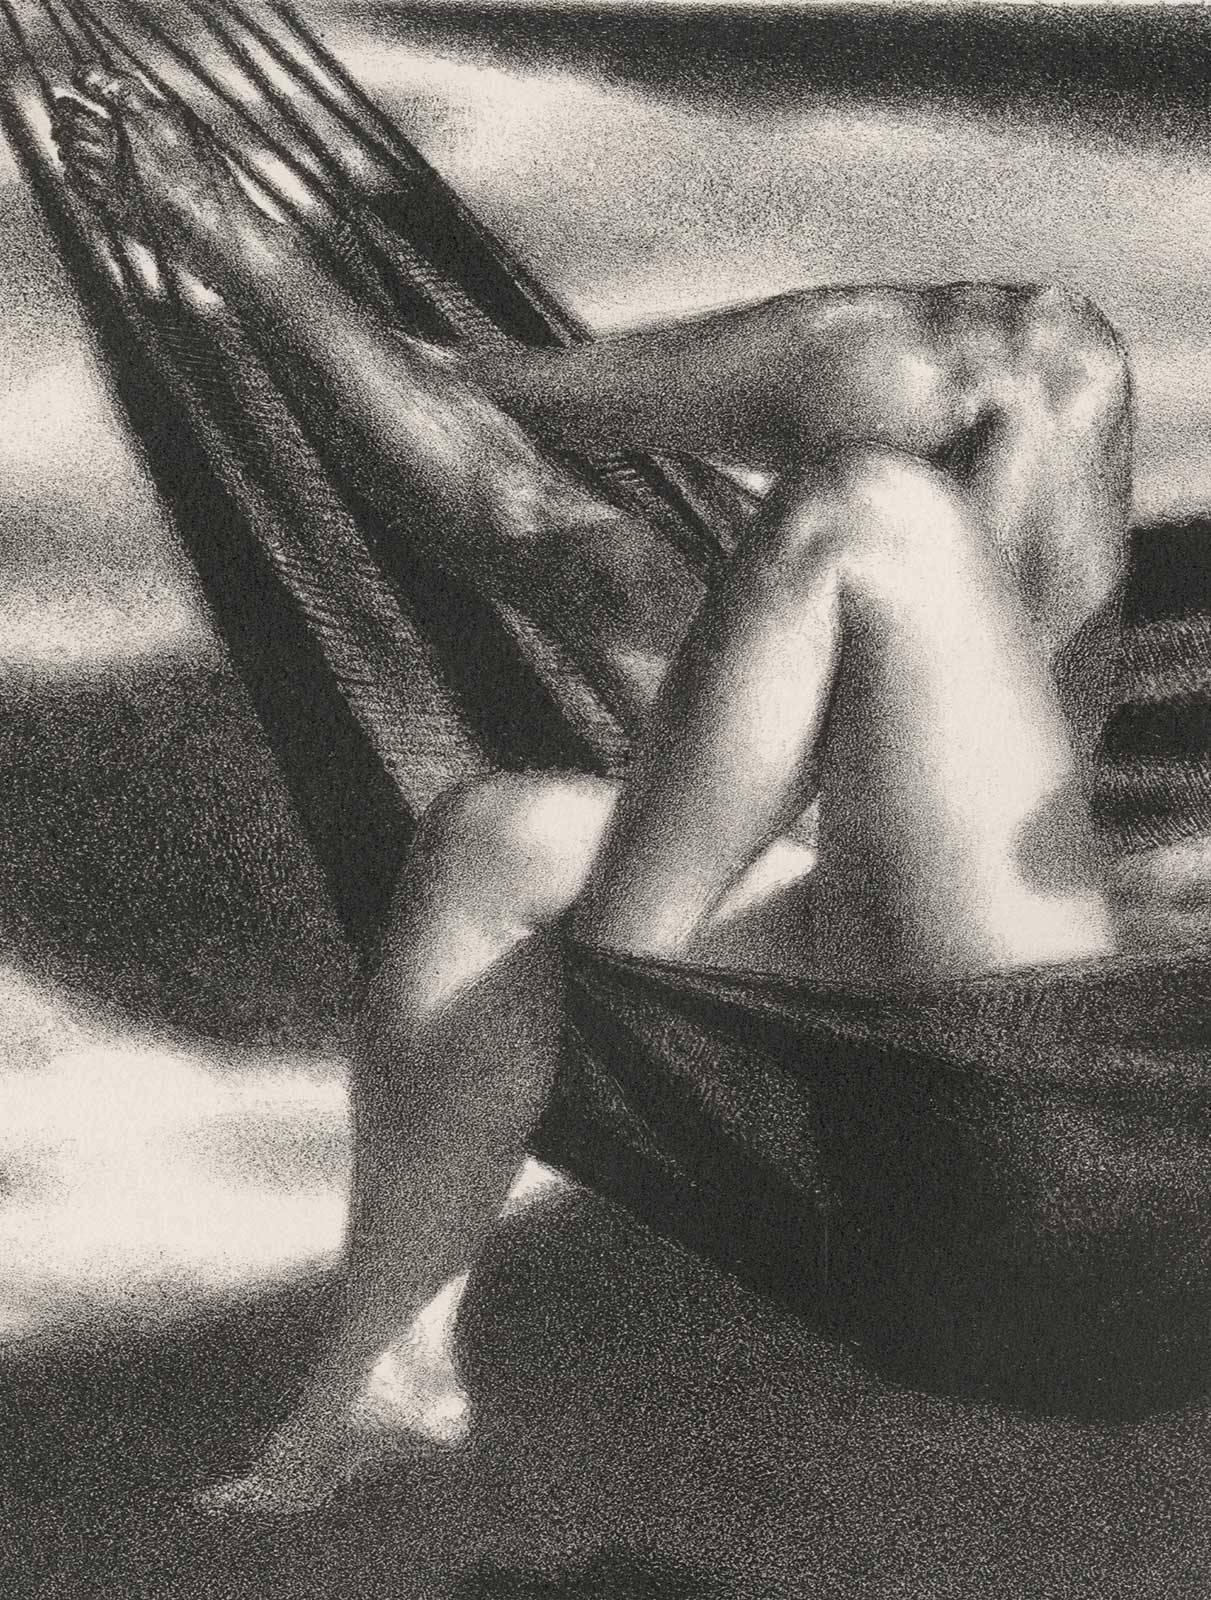 Hammock (A nude couple frolics in a hammock on a lazy summer day) - Print by Joseph Hirsch